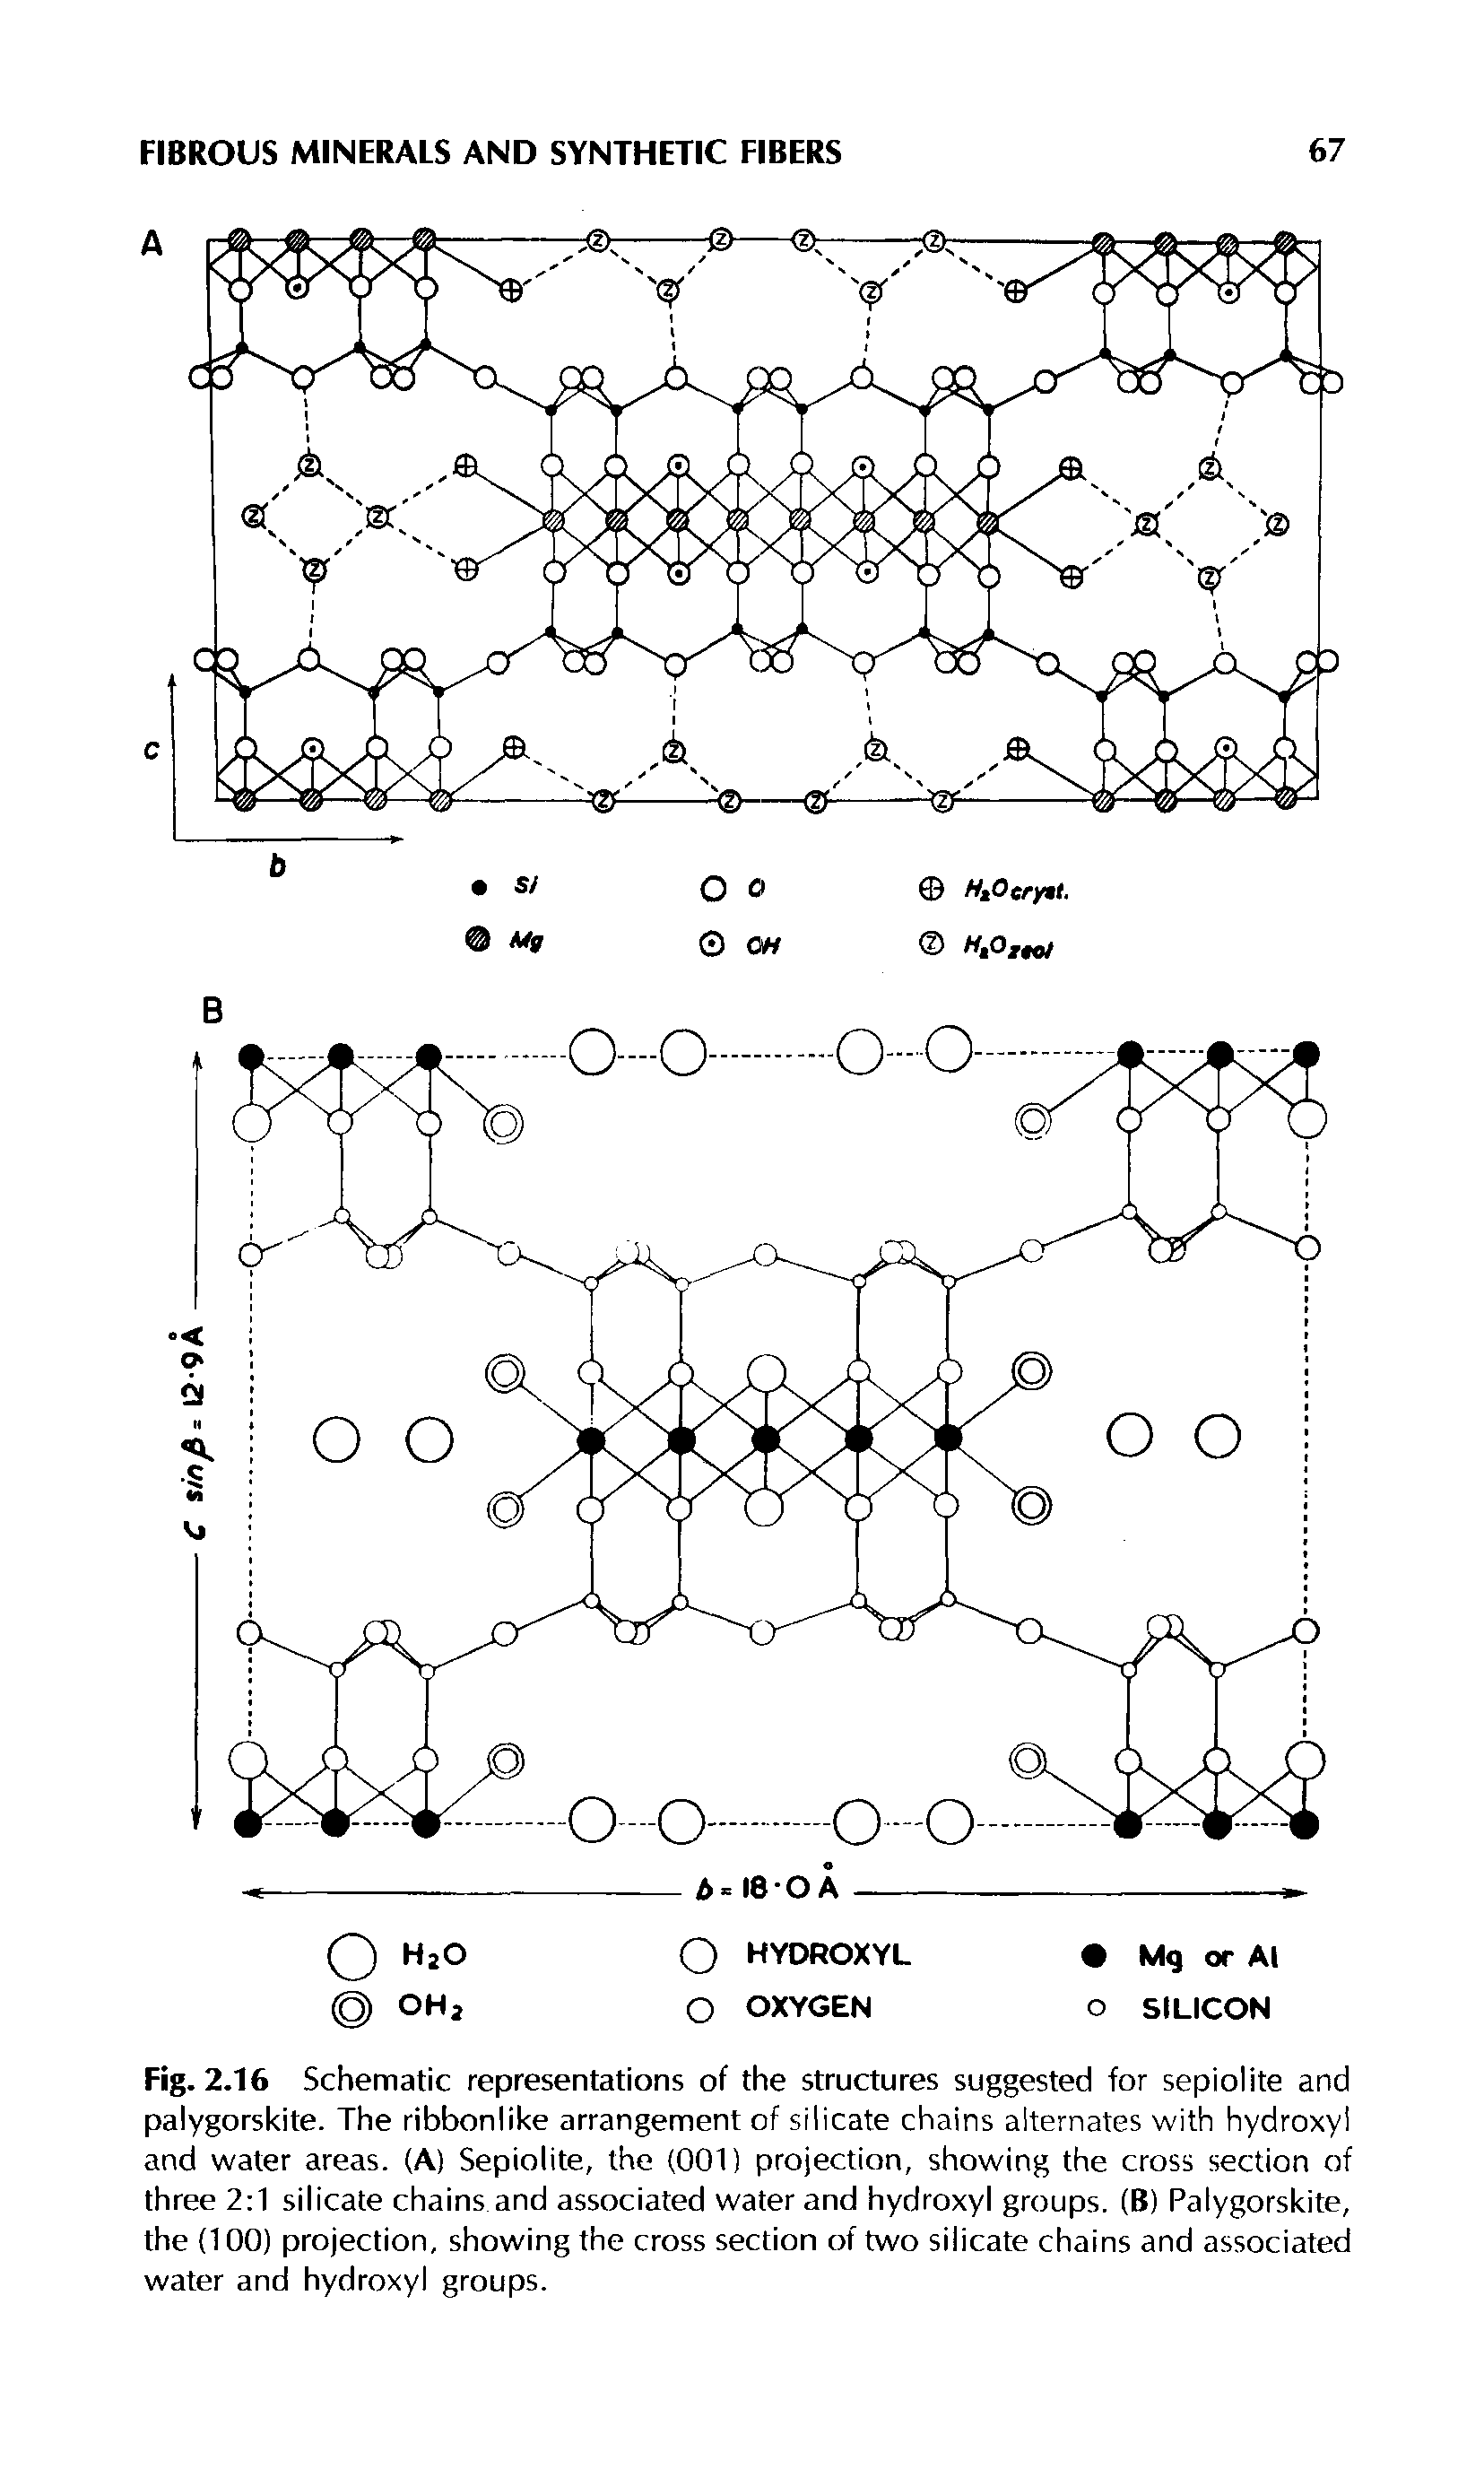 Fig. 2.16 Schematic representations of the structures suggested for sepiolite and palygorskite. The ribbonlike arrangement of silicate chains alternates with hydroxyl and water areas. (A) Sepiolite, the (001) projection, showing the cross section of three 2 1 silicate chains and associated water and hydroxyl groups. (B) Palygorskite, the (100) projection, showing the cross section of two silicate chains and associated water and hydroxyl groups.